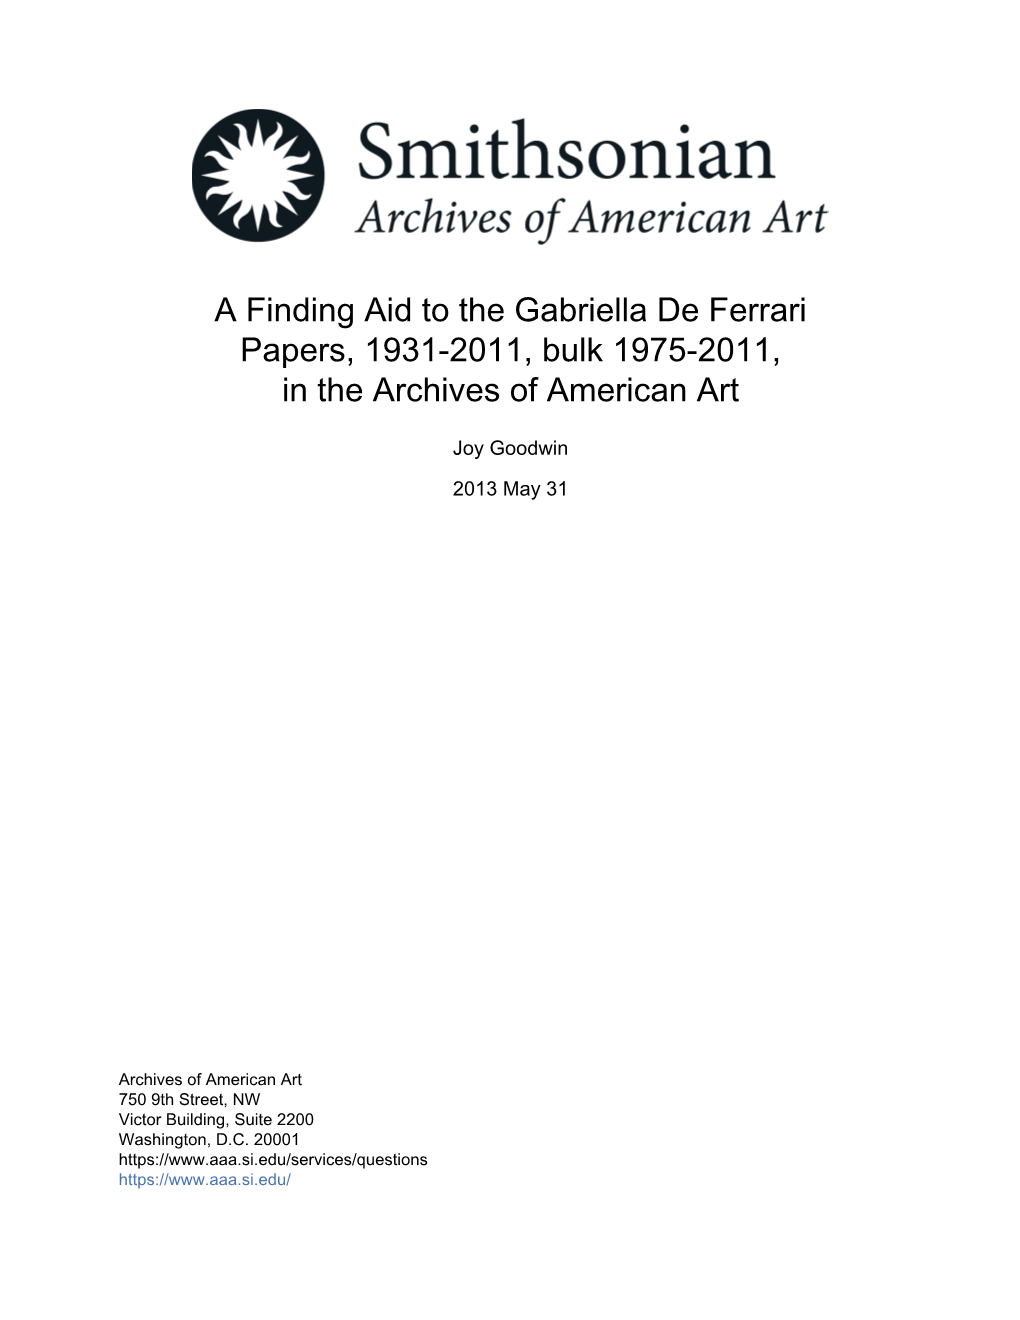 A Finding Aid to the Gabriella De Ferrari Papers, 1931-2011, Bulk 1975-2011, in the Archives of American Art